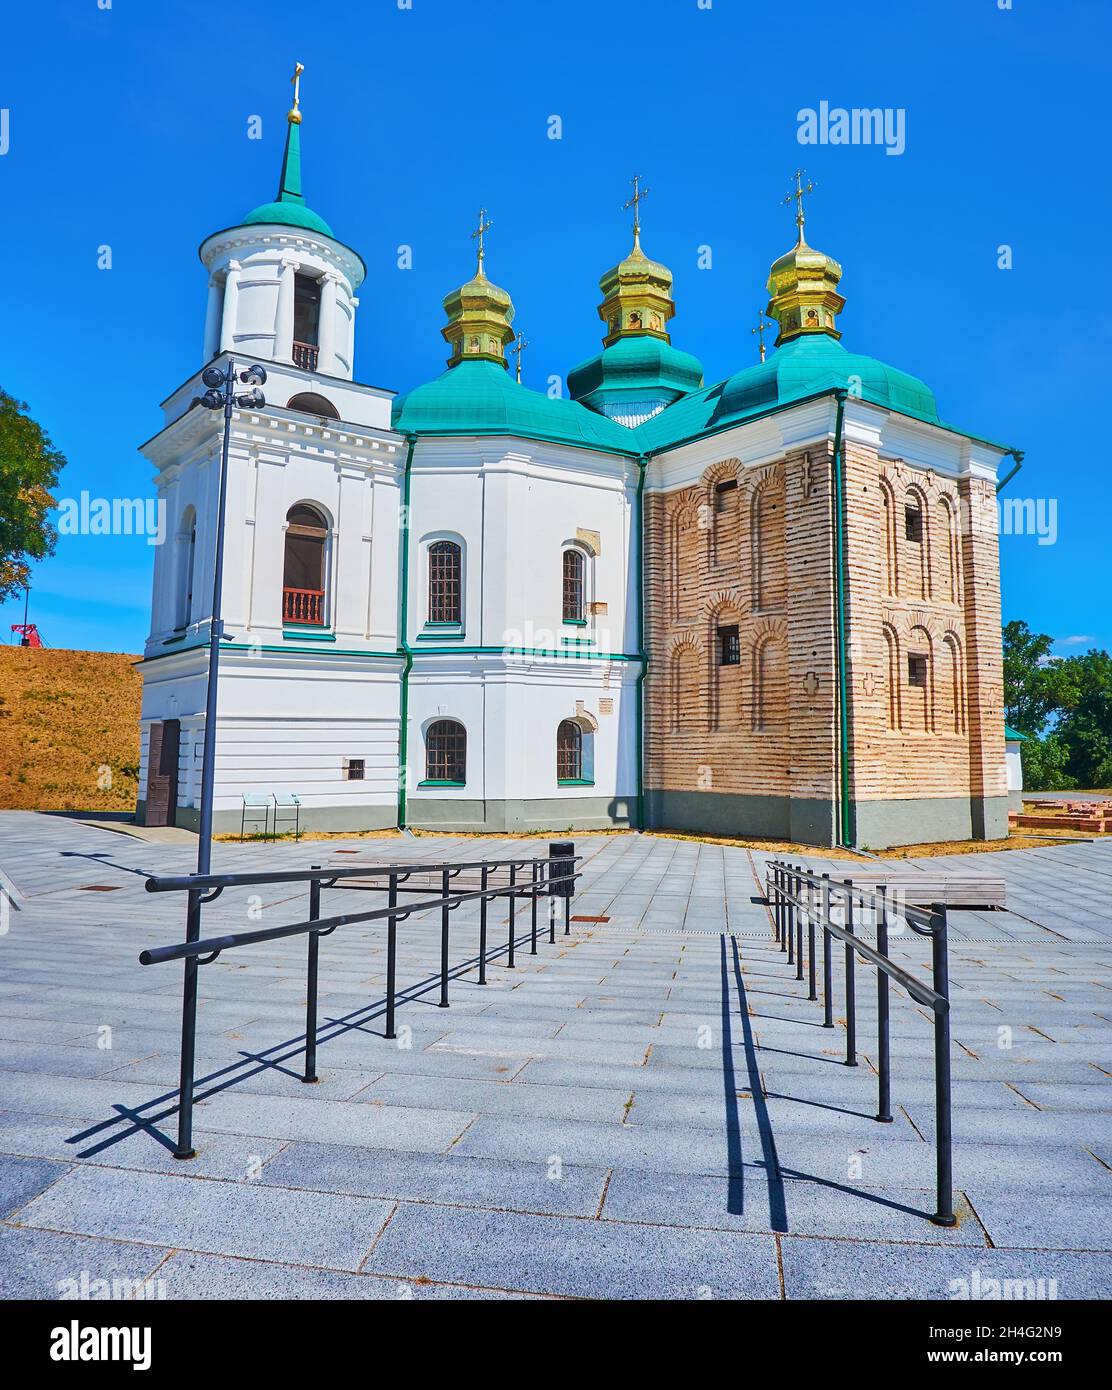 The ancient Church of the Saviour at Berestove, located immediately outside the Kyiv Pechersk Lavra fortification in Pechersk, Kyiv, Ukraine Stock Photo